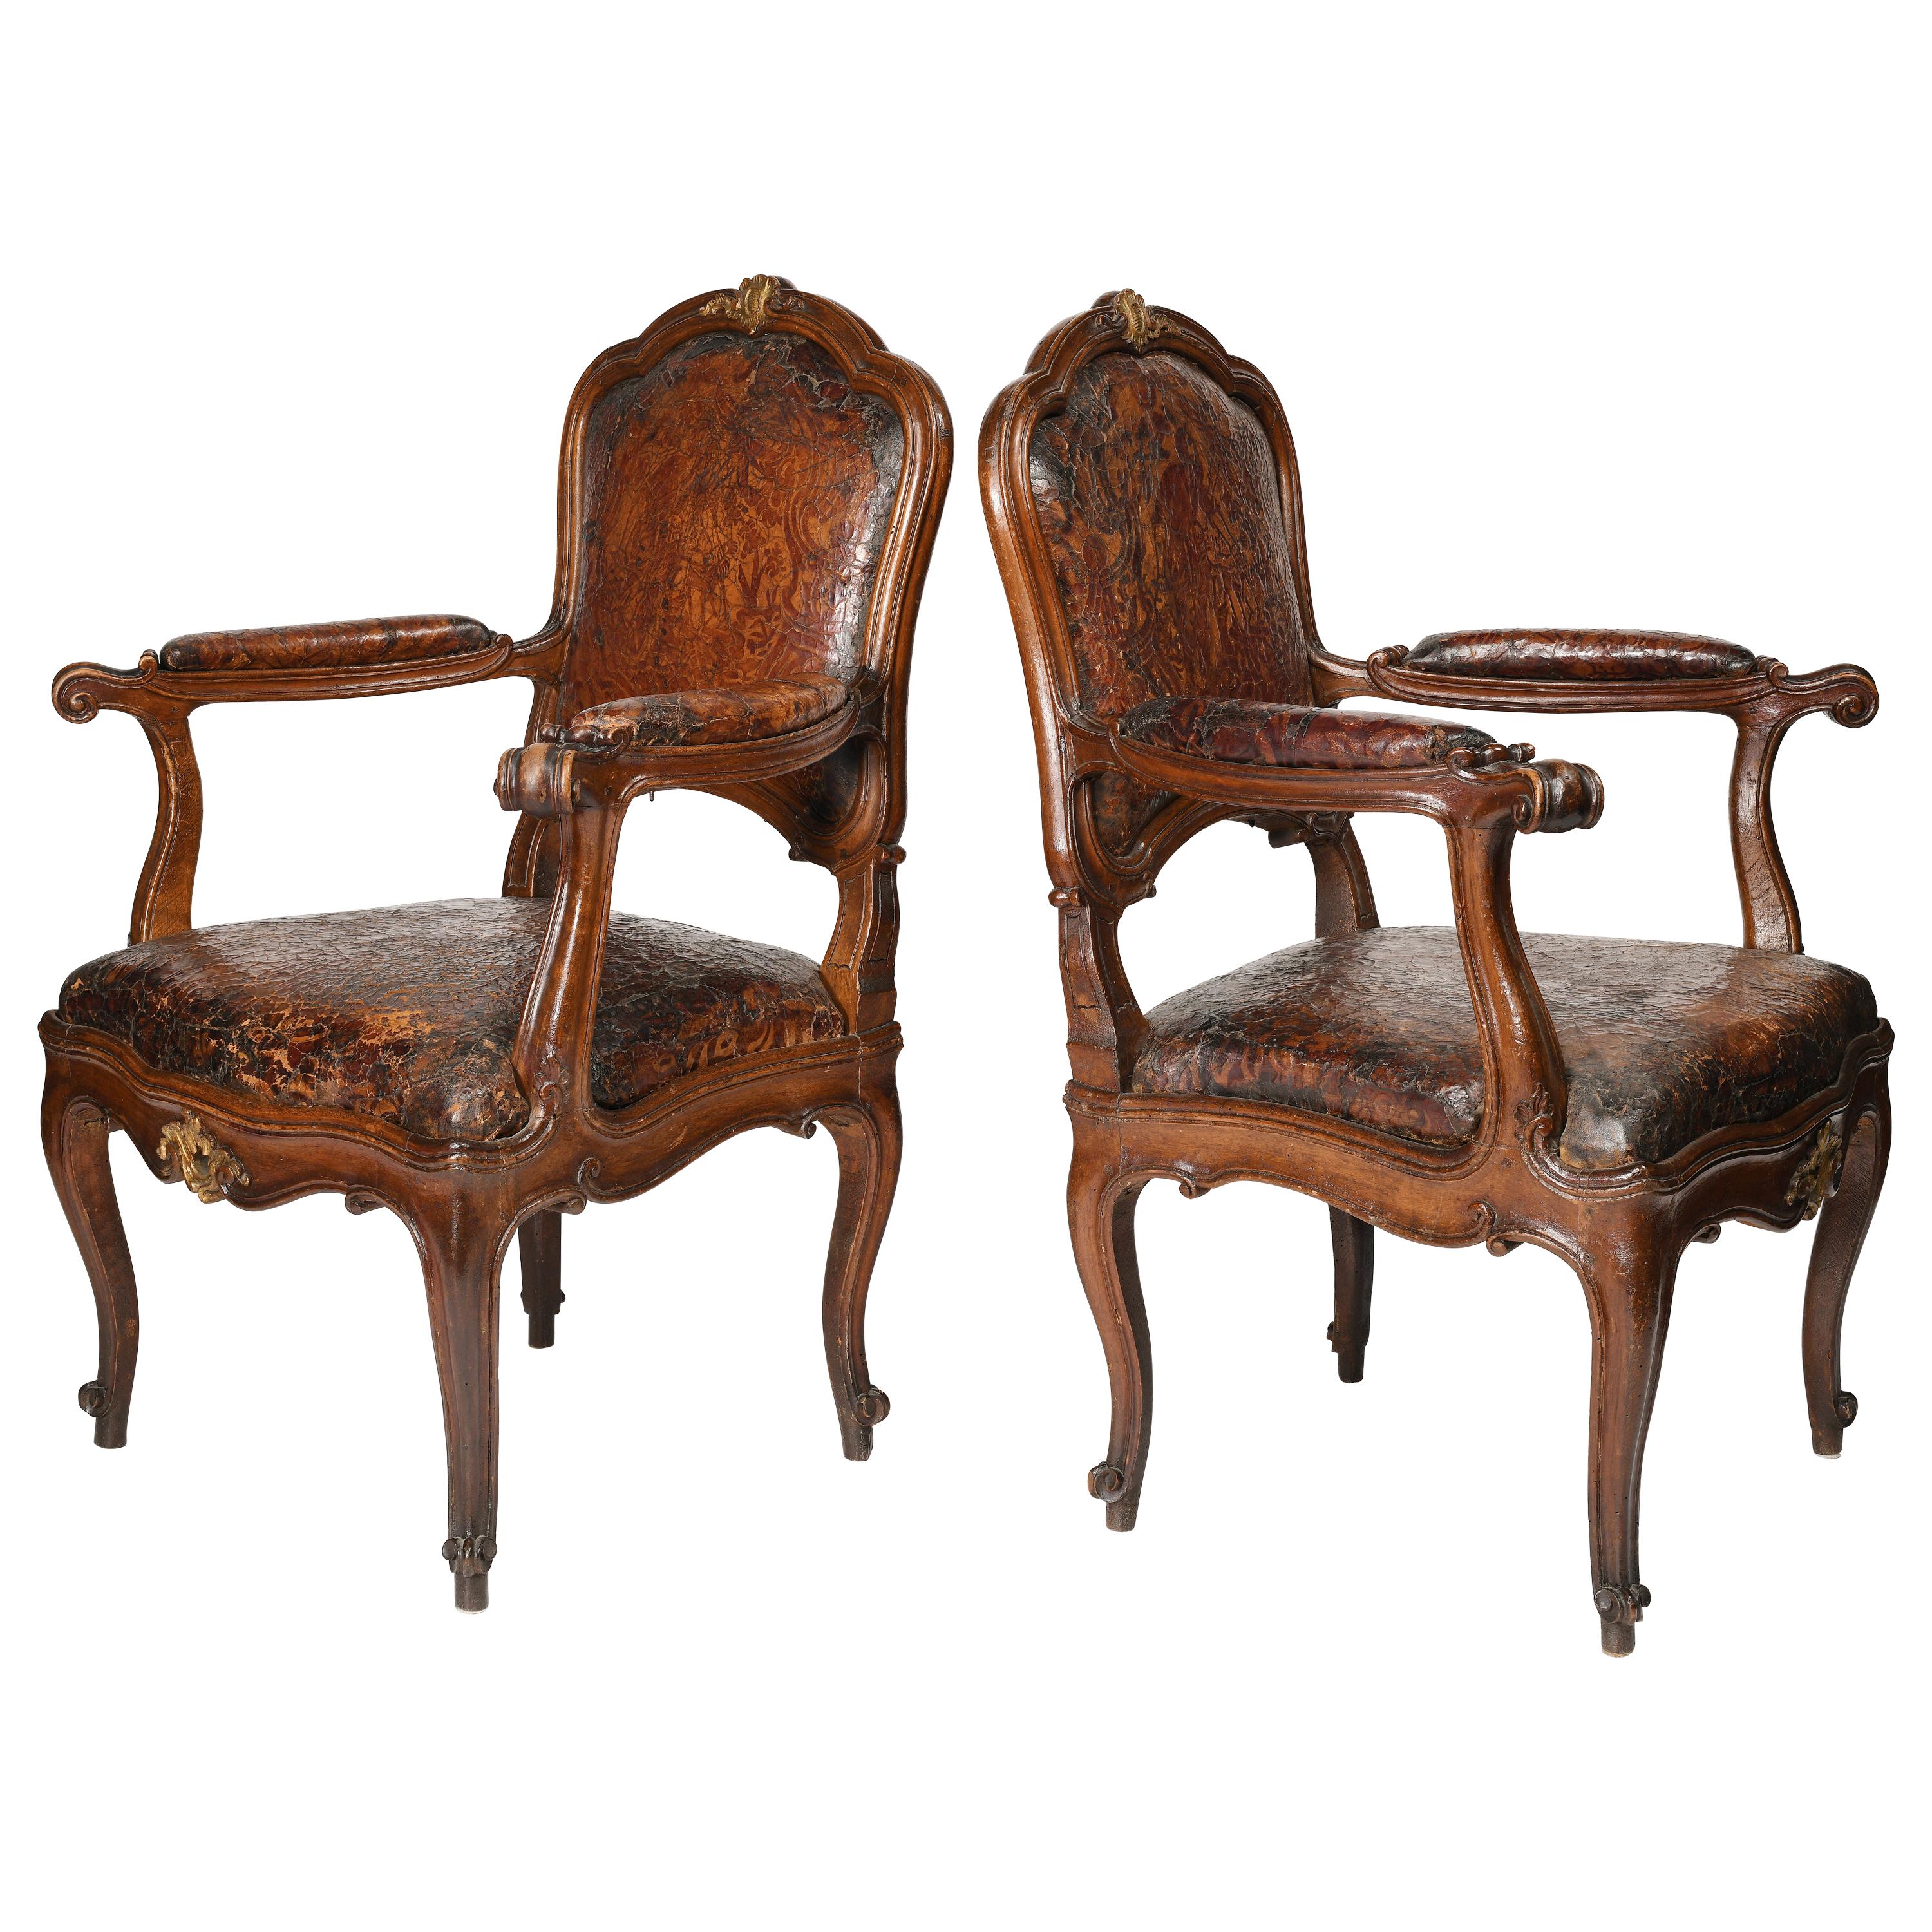 Mid-18th Century Italian Pair of Armchairs with Leather Covers, Milan circa 1750